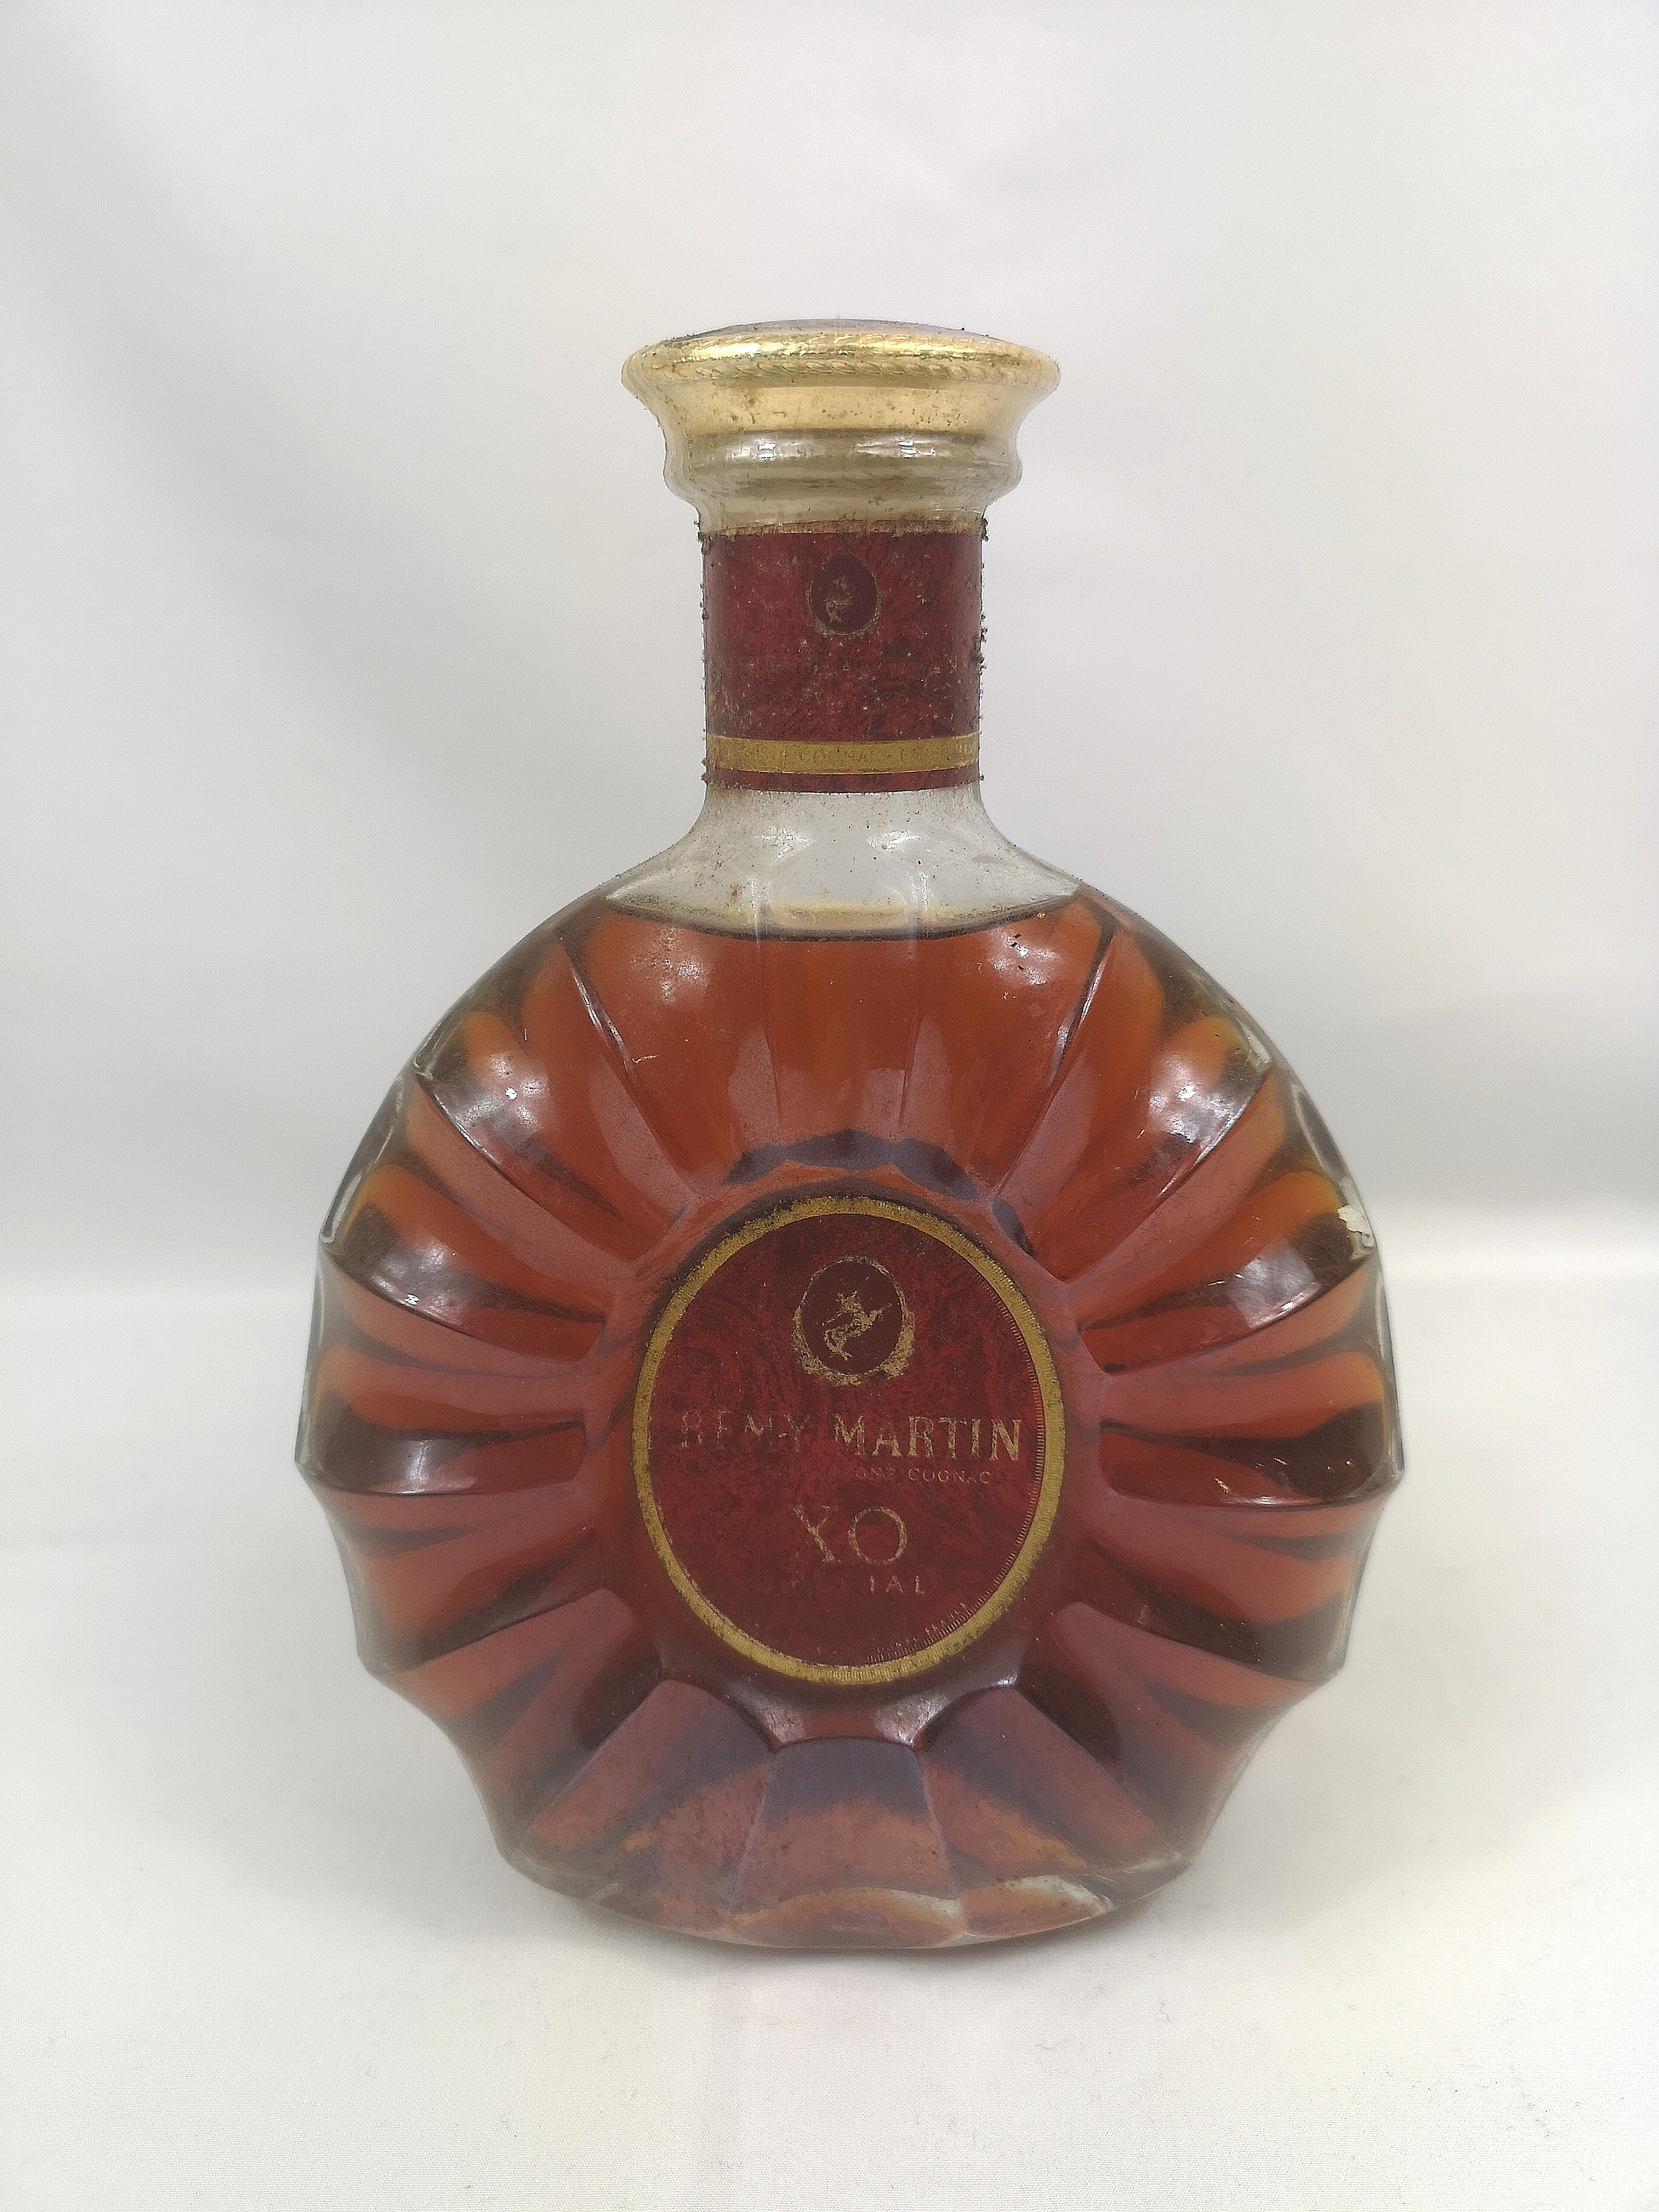 70cl bottle of Remy Martin XO special cognac